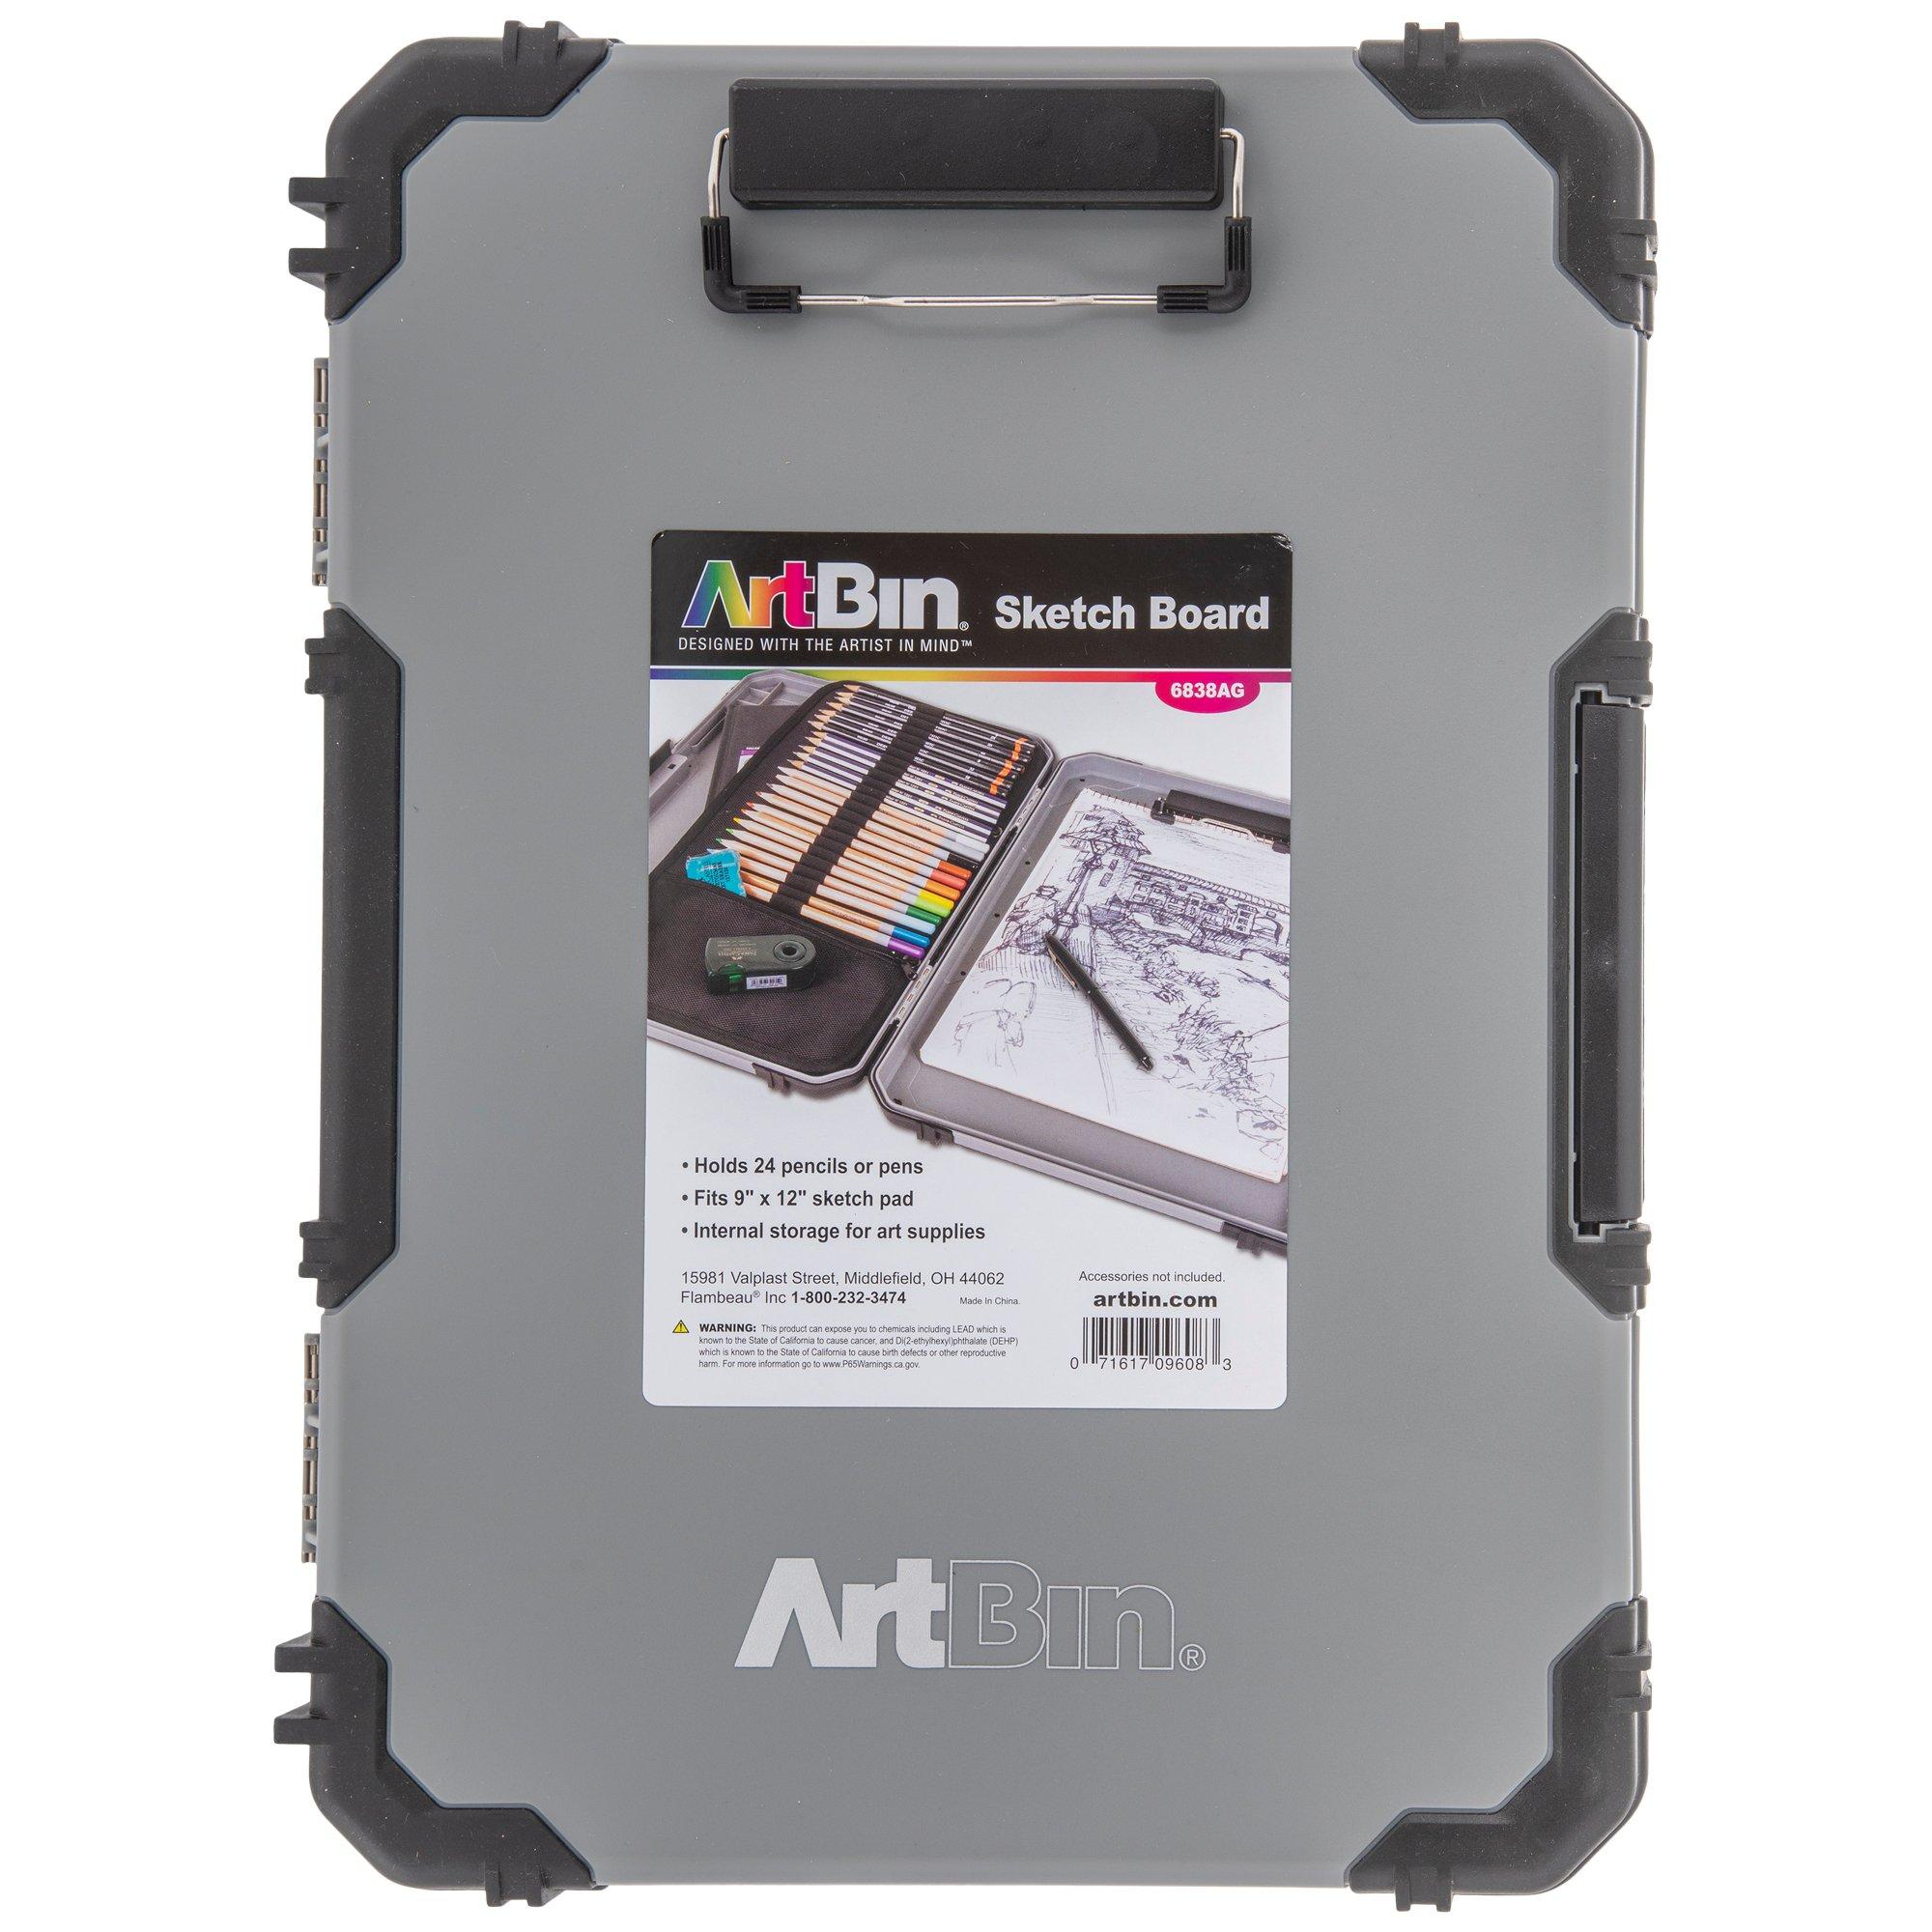  ArtBin 6838AG Sketch Board, Portable Drawing Surface with  Internal Art & Craft Storage, Grey